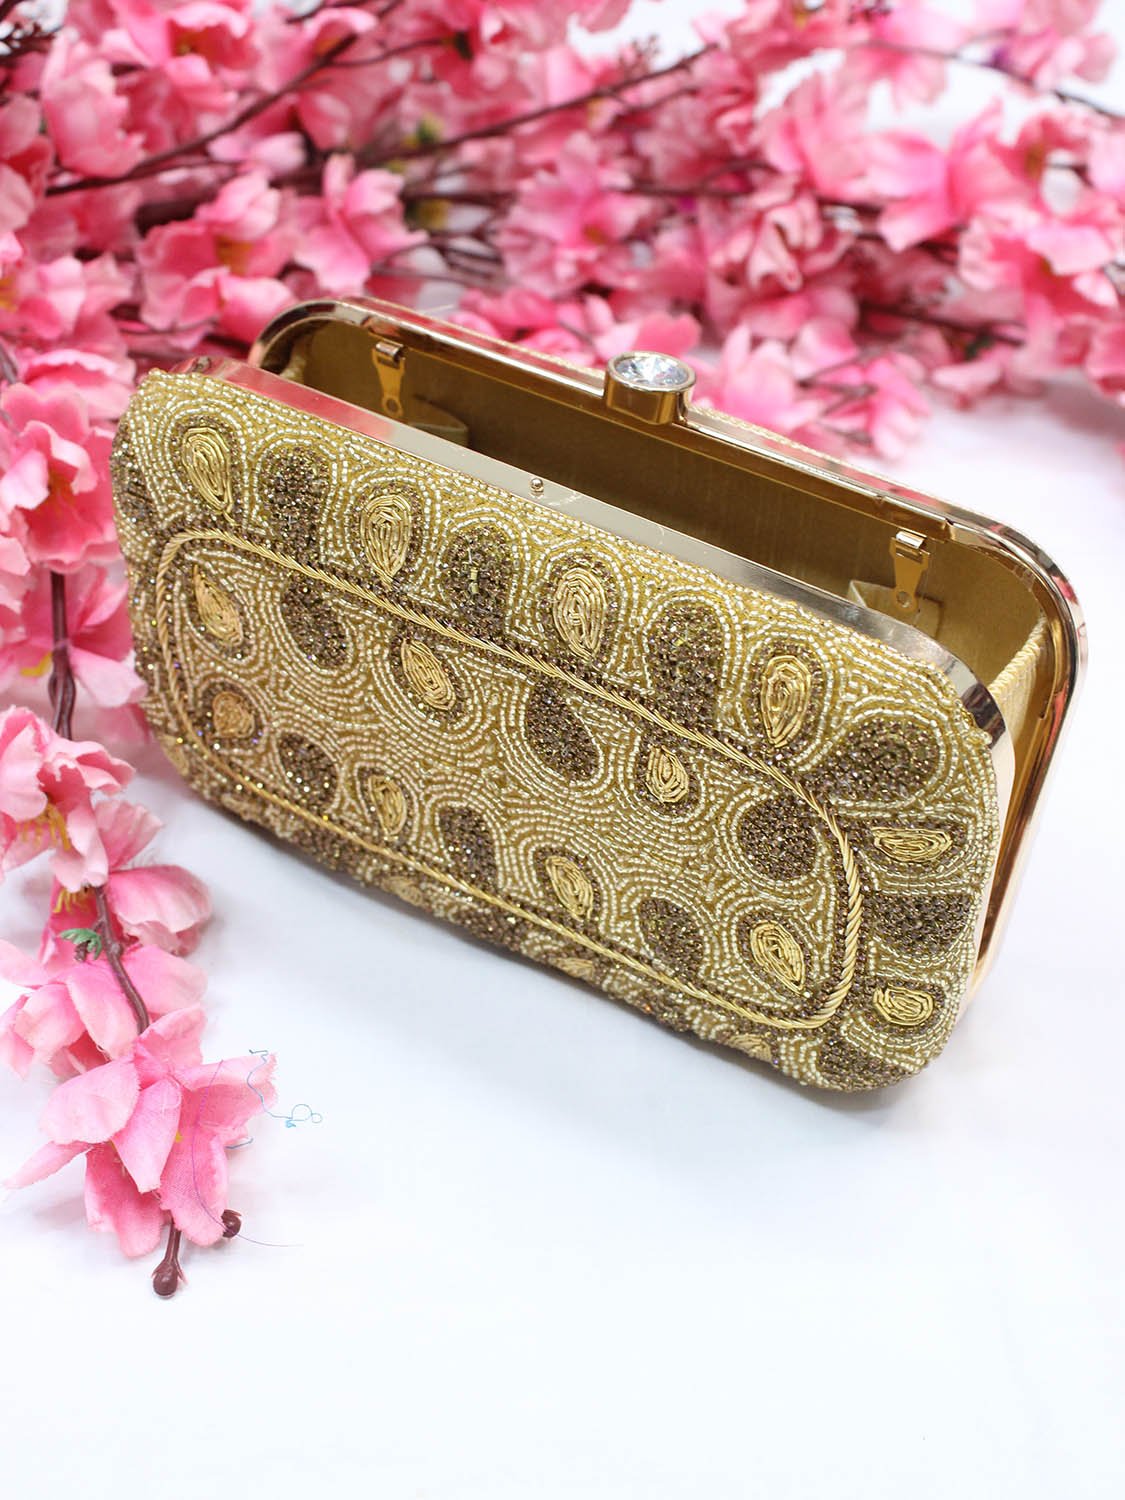 Exclusive Clutch Sling Bags for Elevated Style - Golden Sparkle - Luxurion World